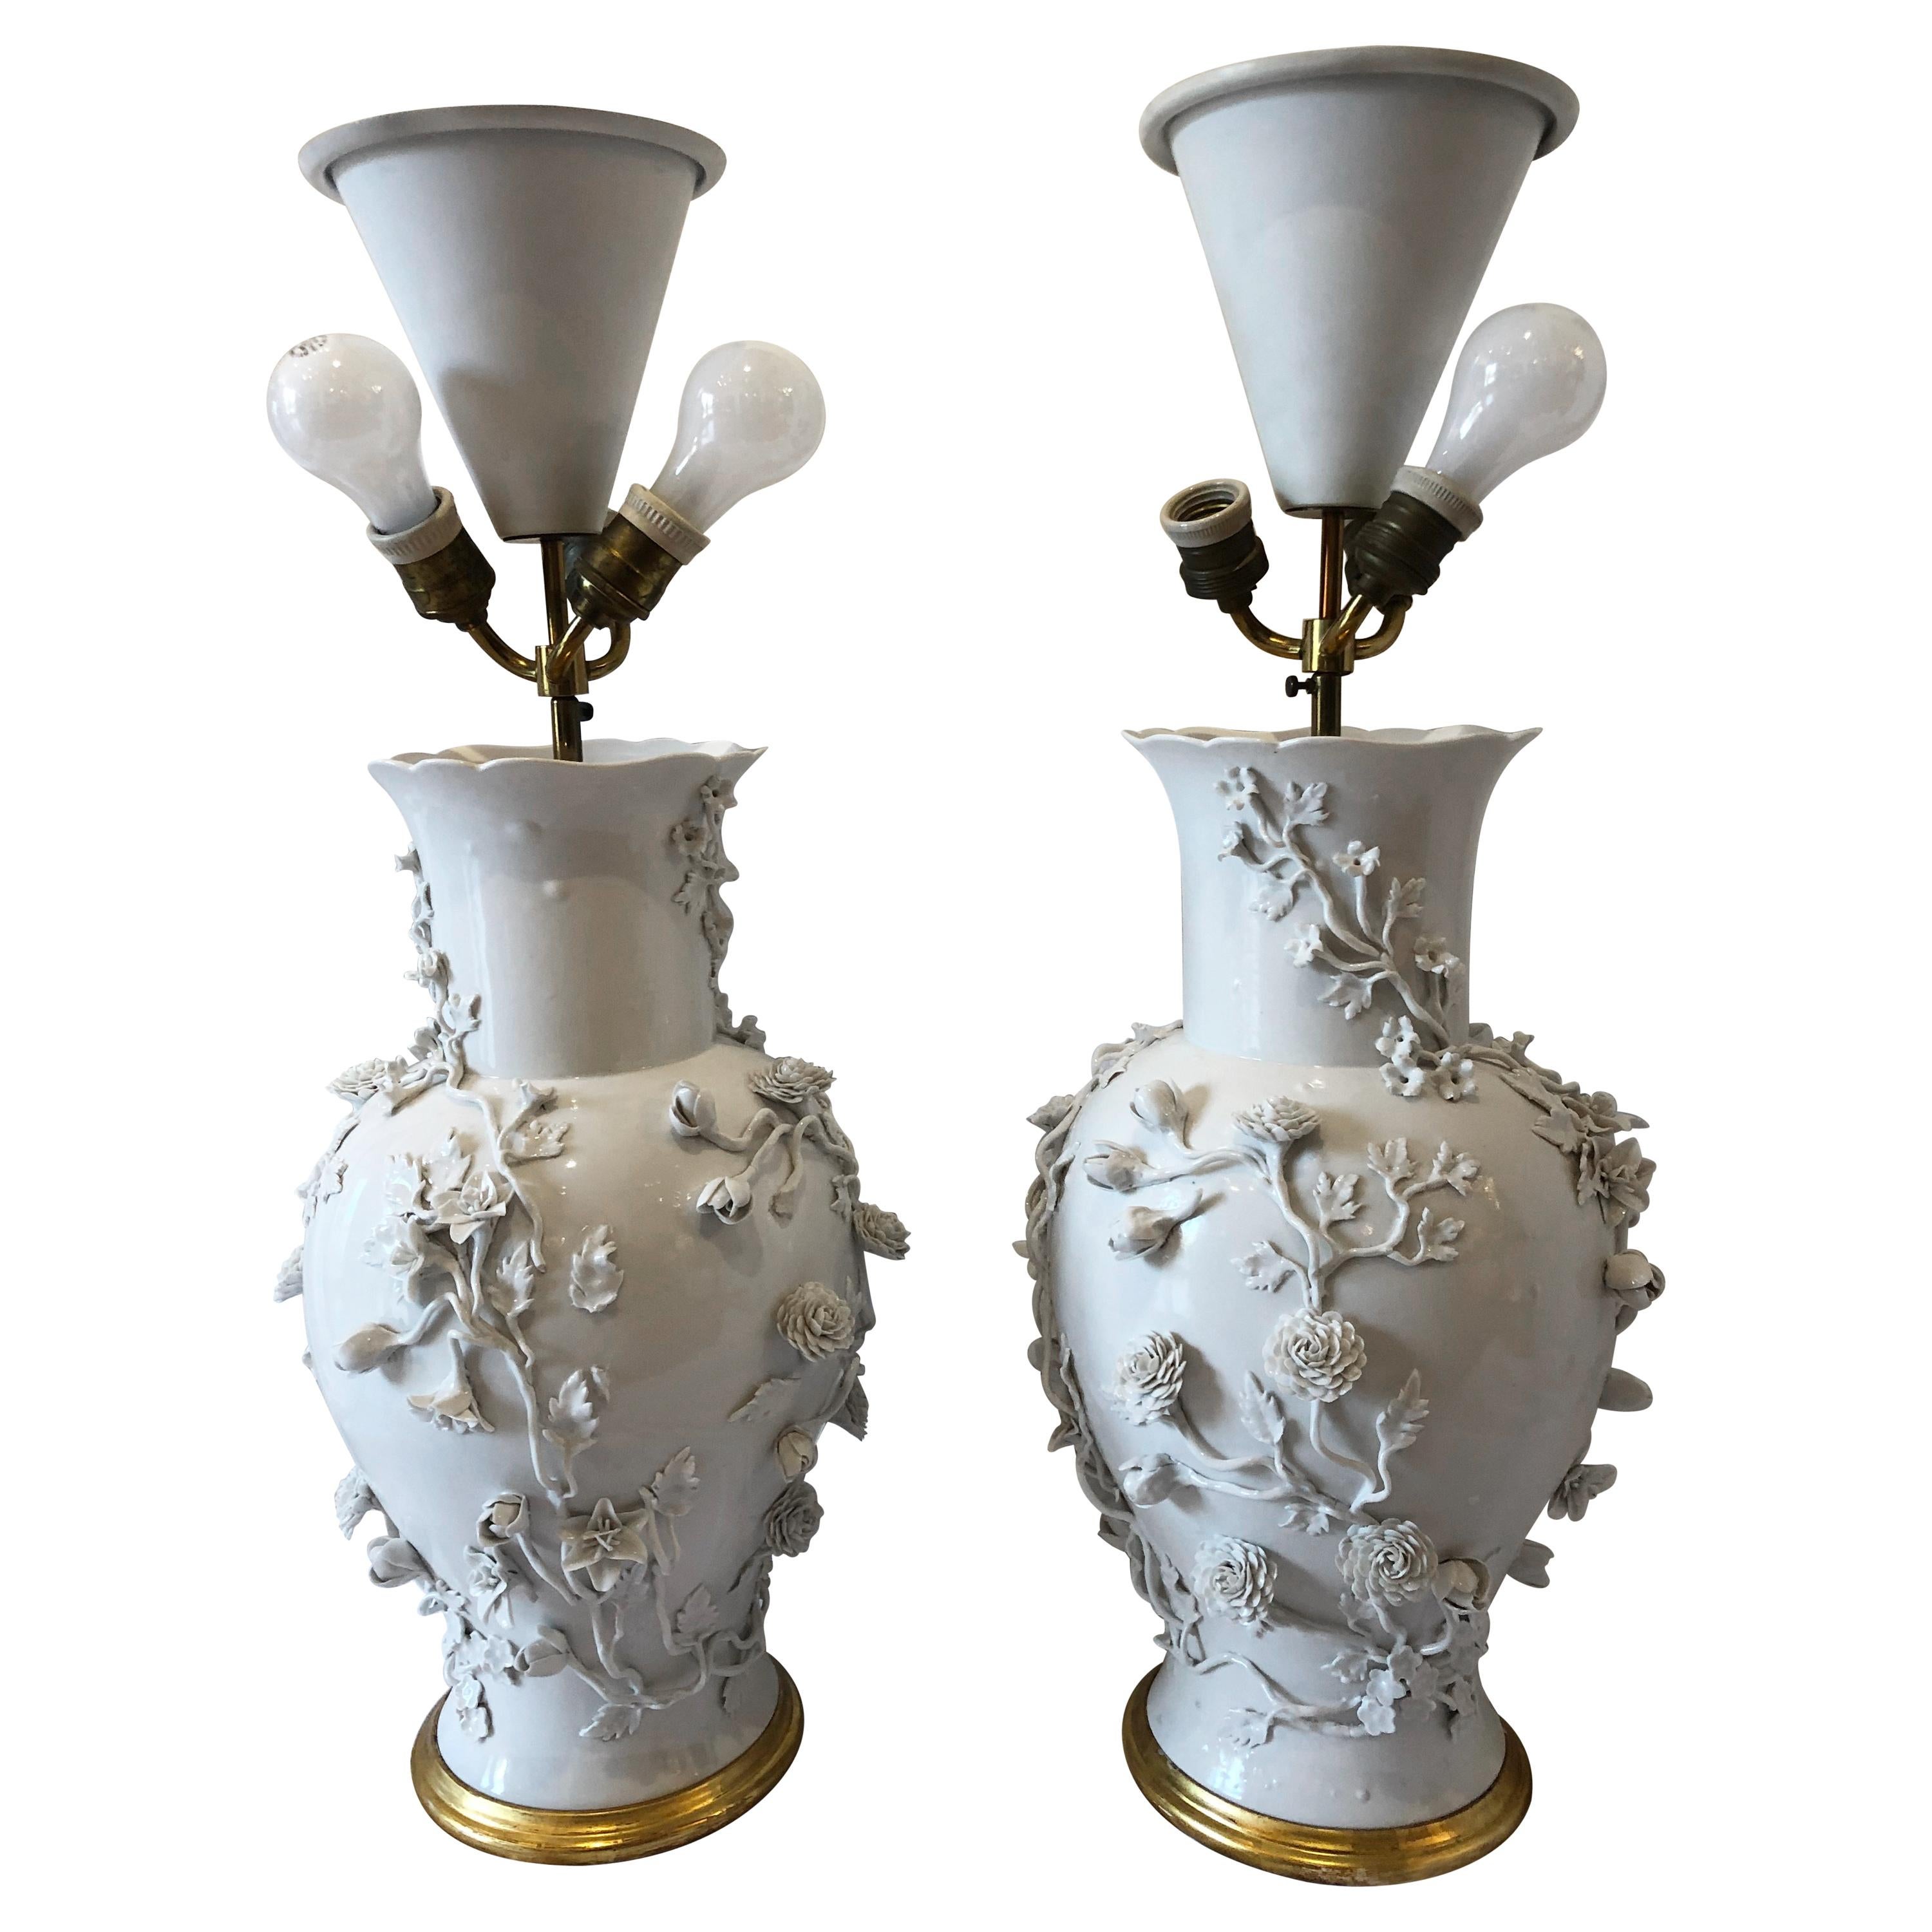 Pair of Large Chinese Blanc De Chine Porcelain Vase Lamps, Applied Flowers